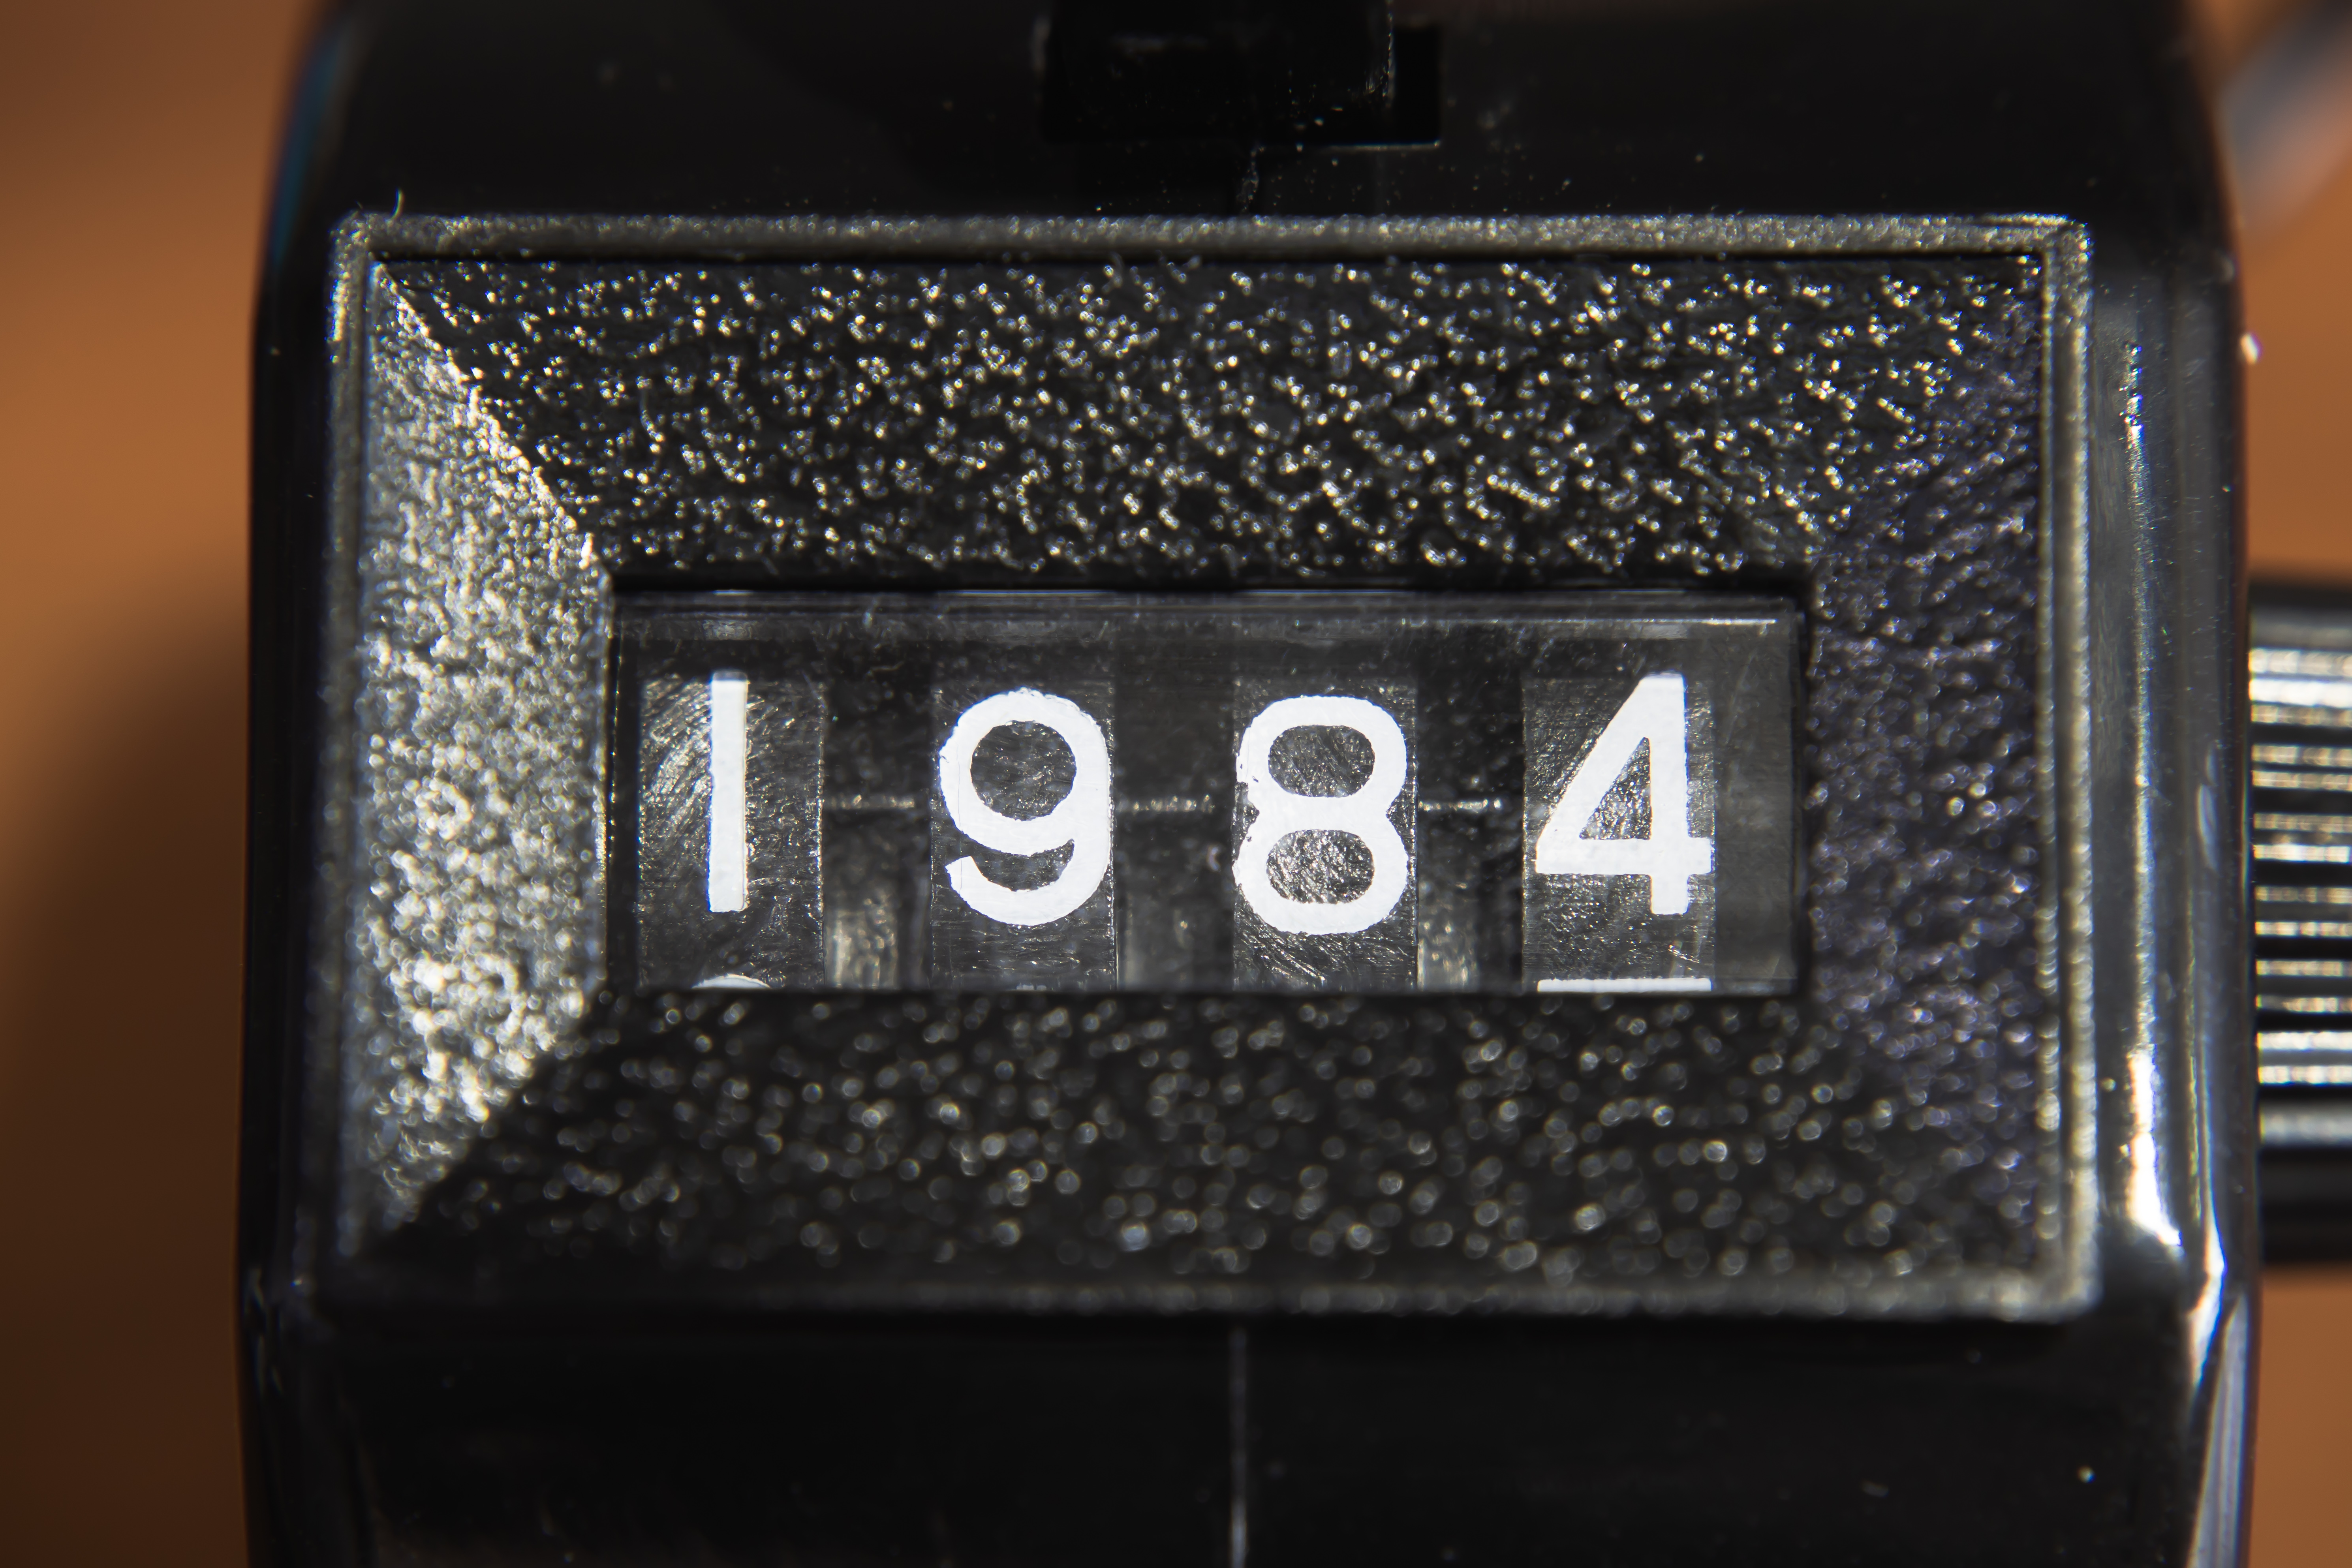 Image of tally counter showing 1984